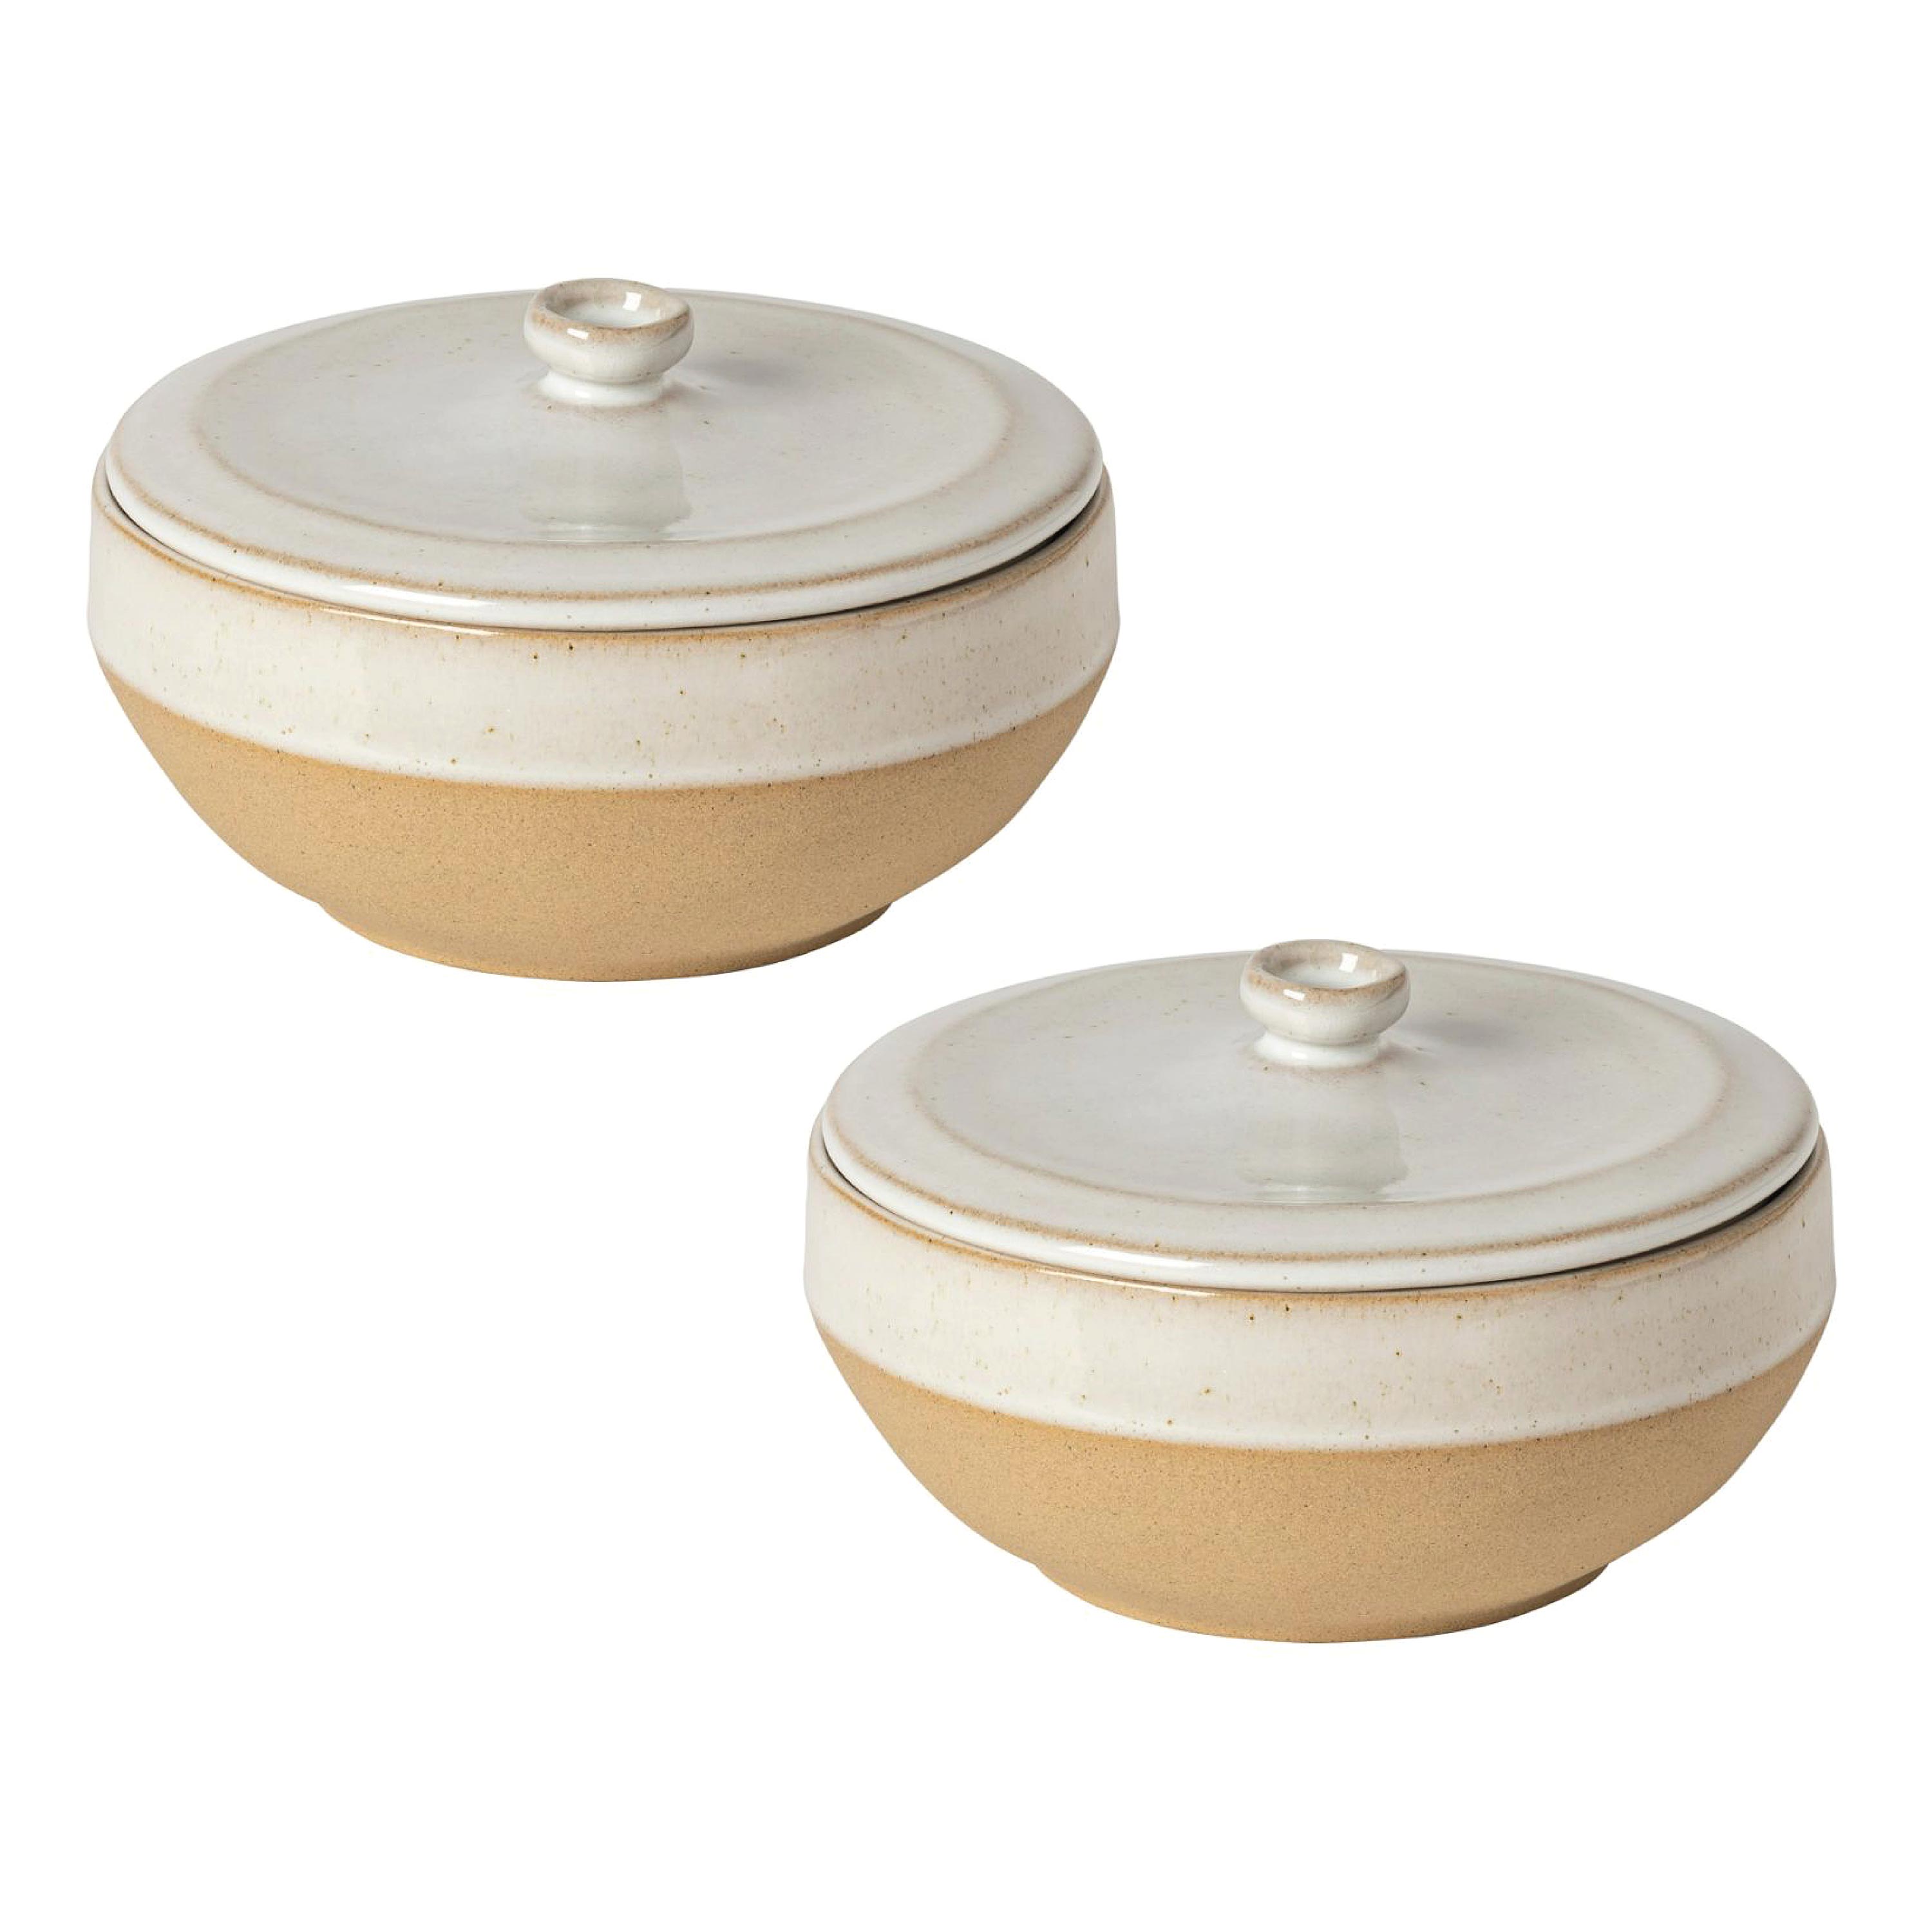 Marrakesh Large Covered Casserole Dish, Set of 2 swatch image